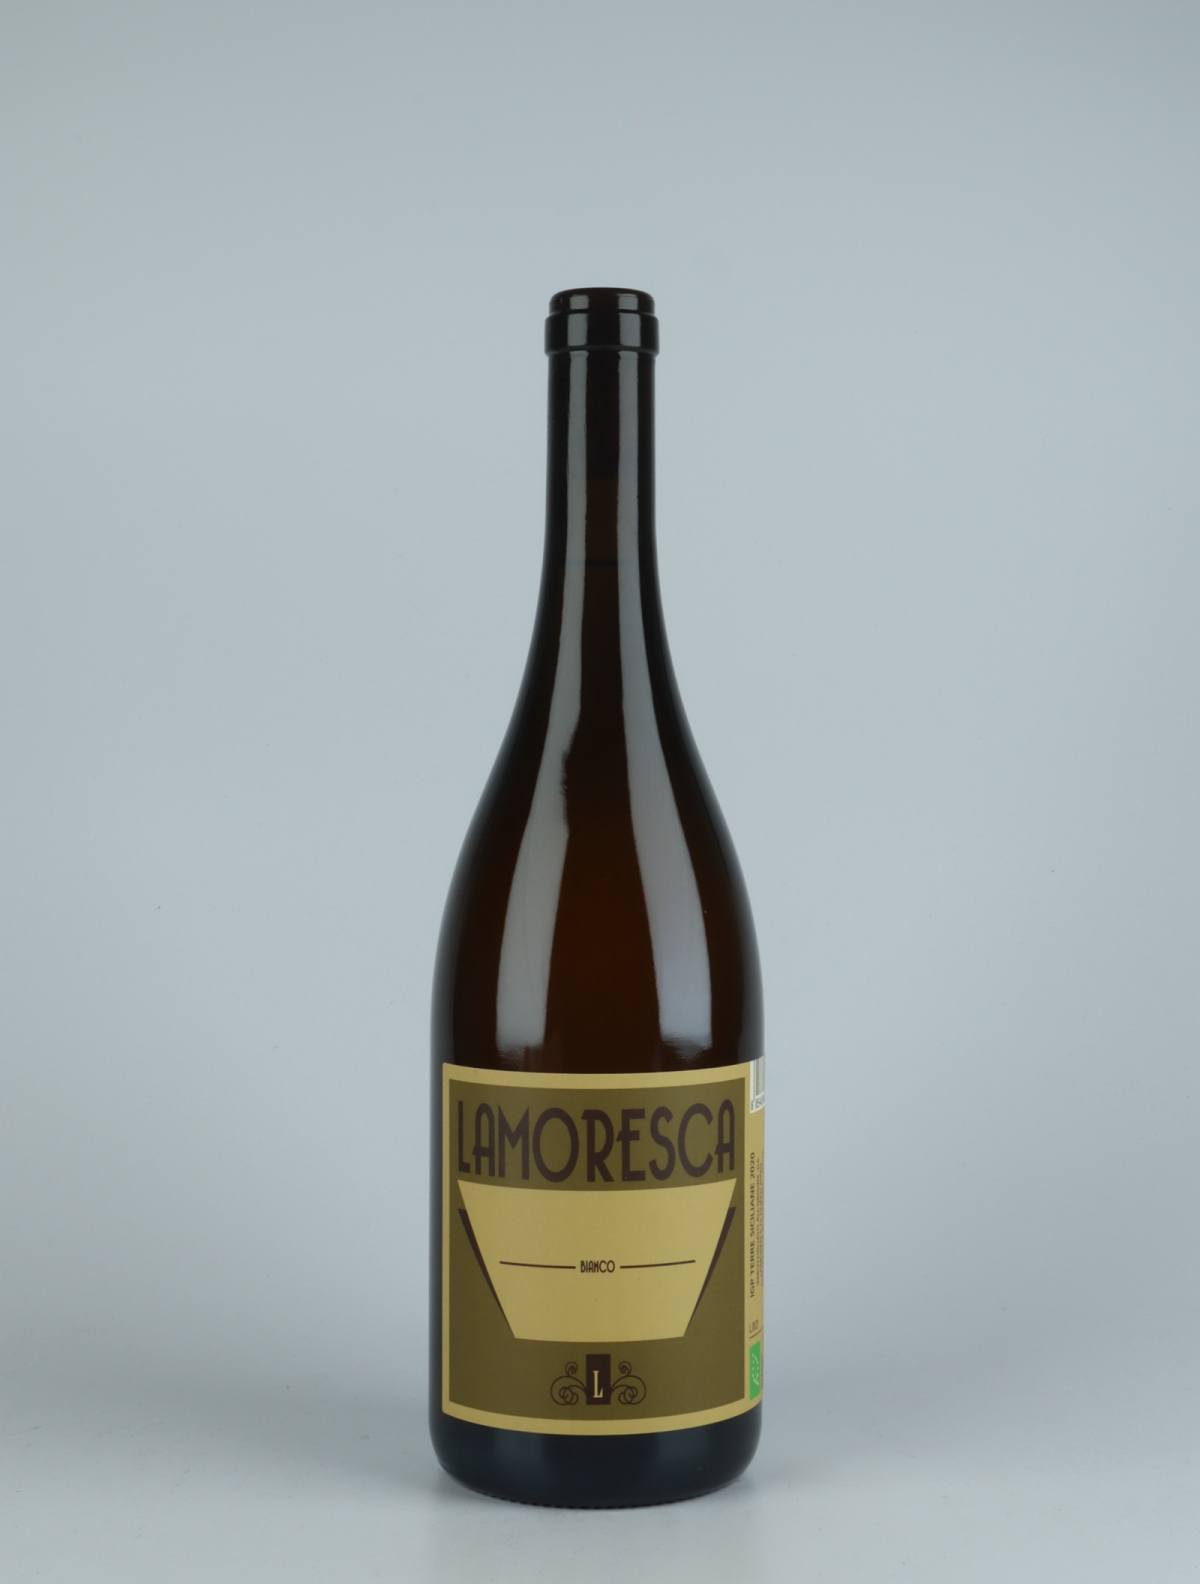 A bottle 2020 Bianco Orange wine from Lamoresca, Sicily in Italy